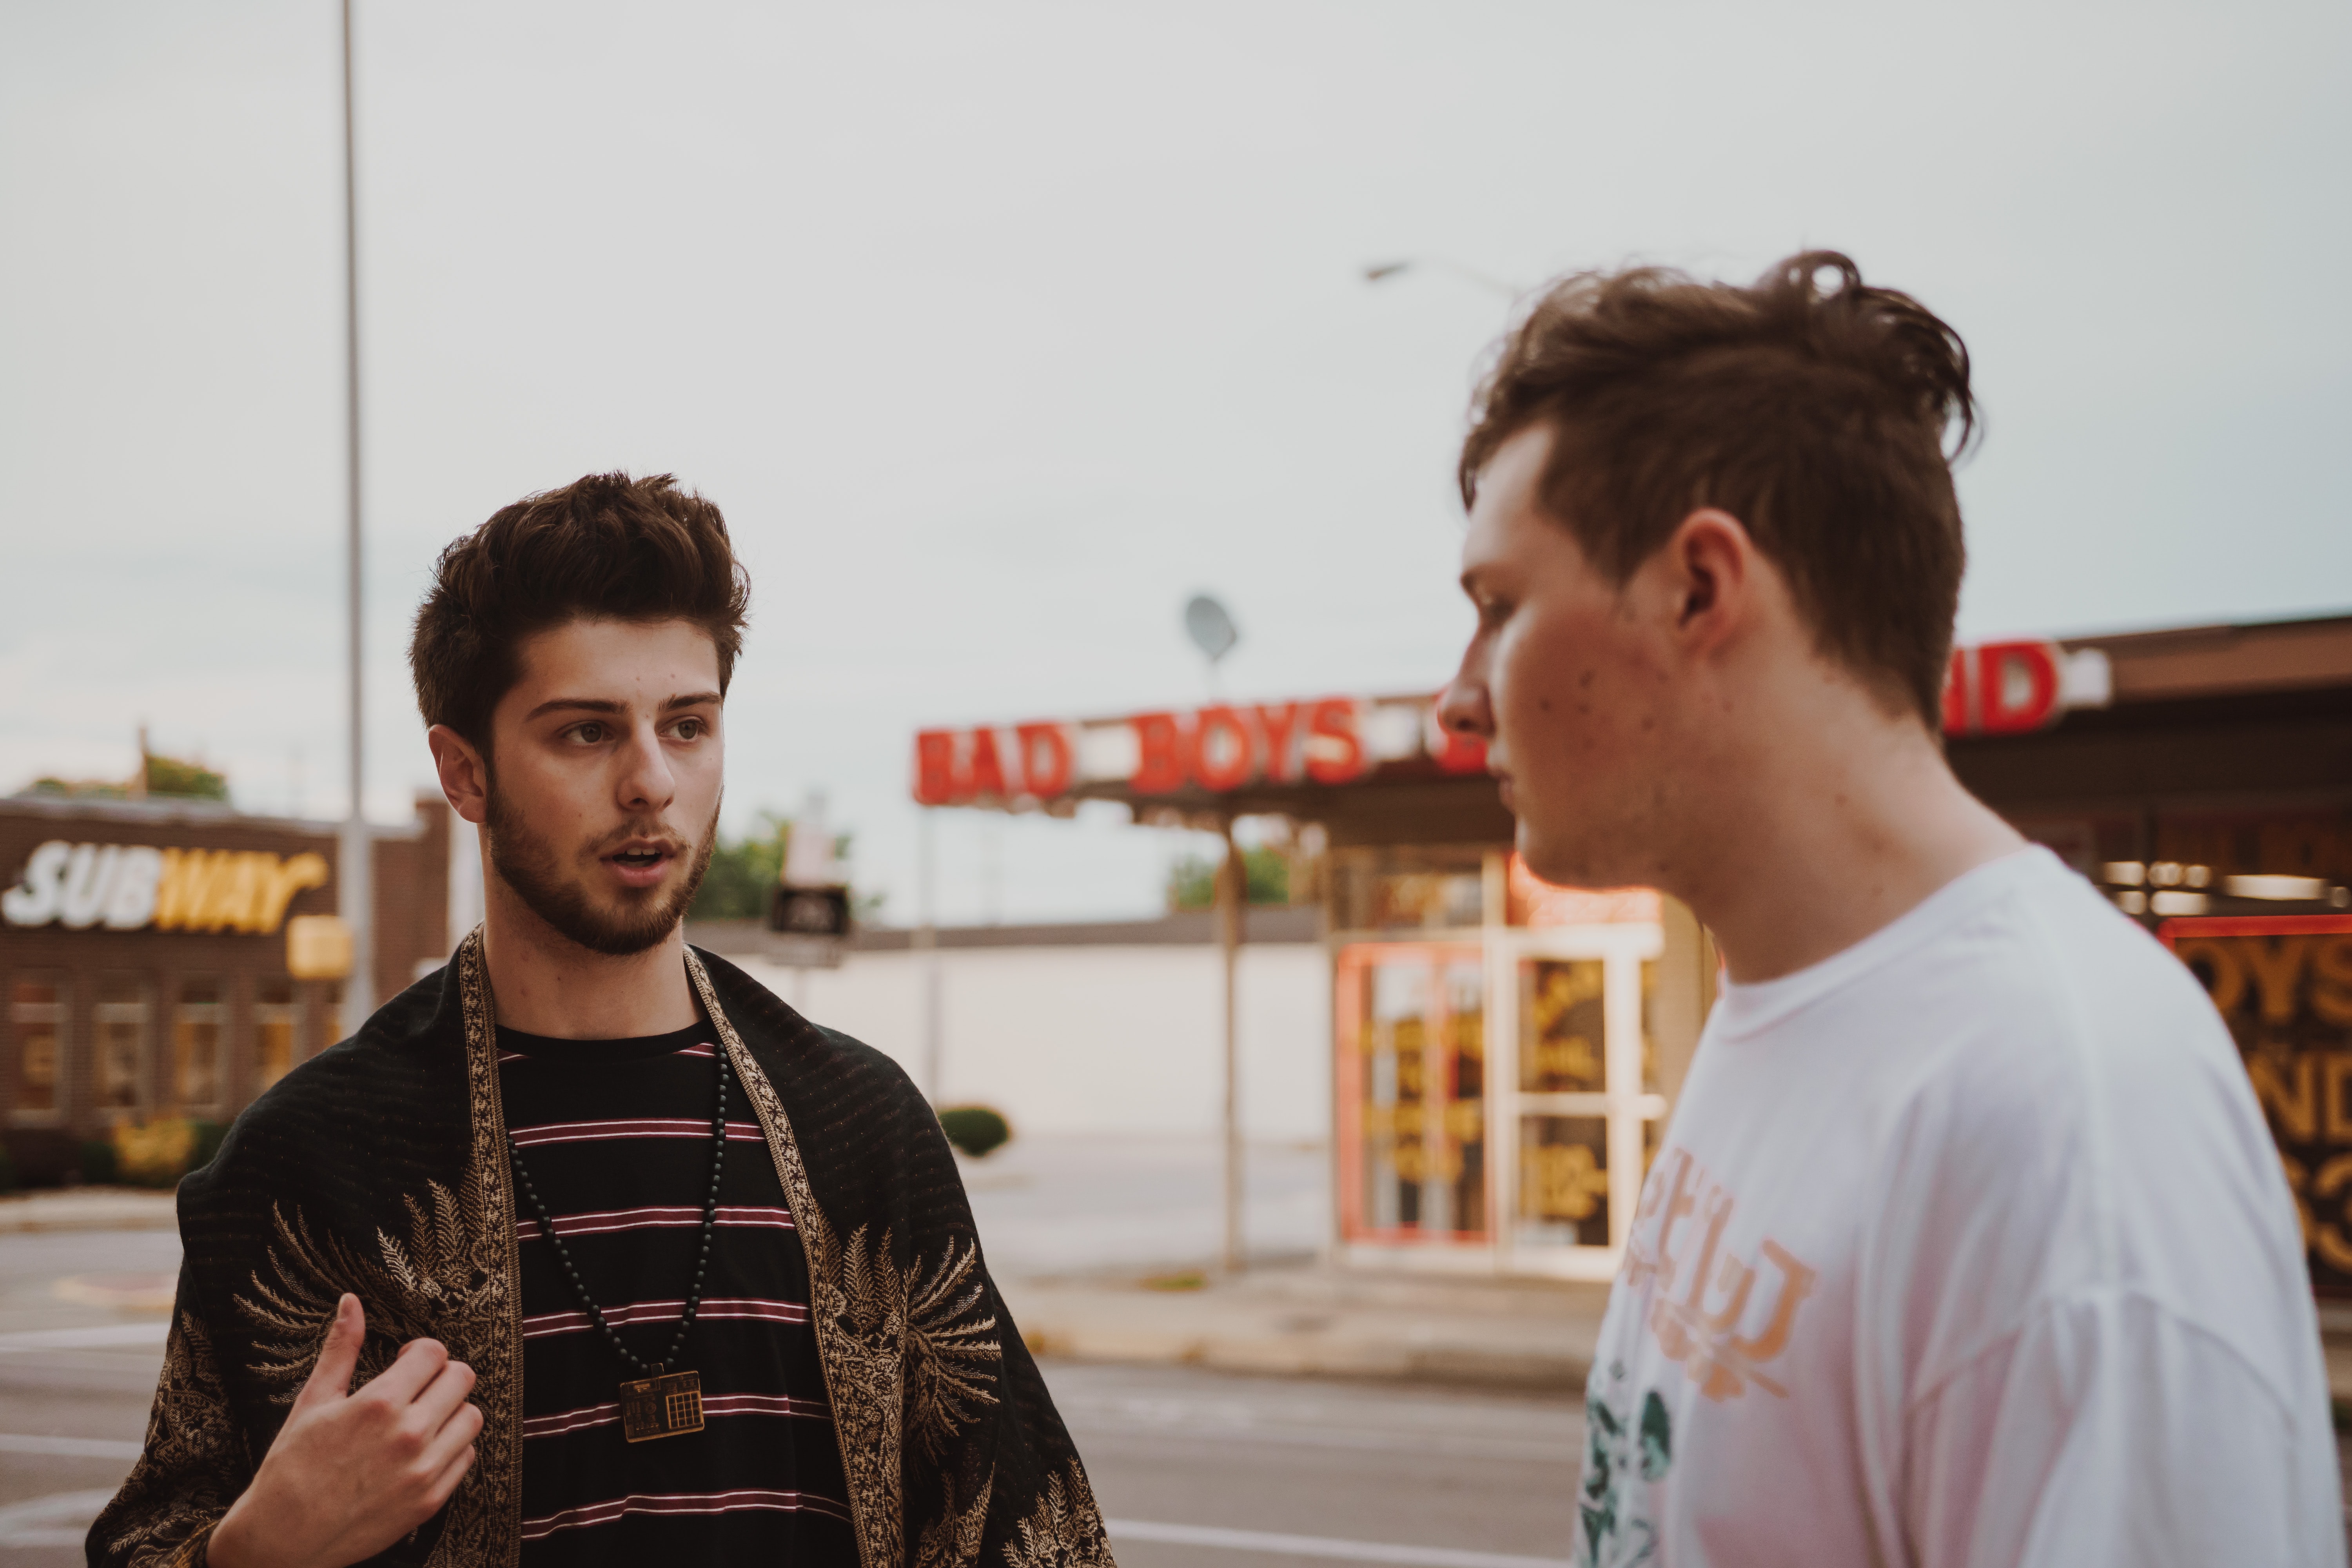 Stock image of two young men having a conversation in a suburban street